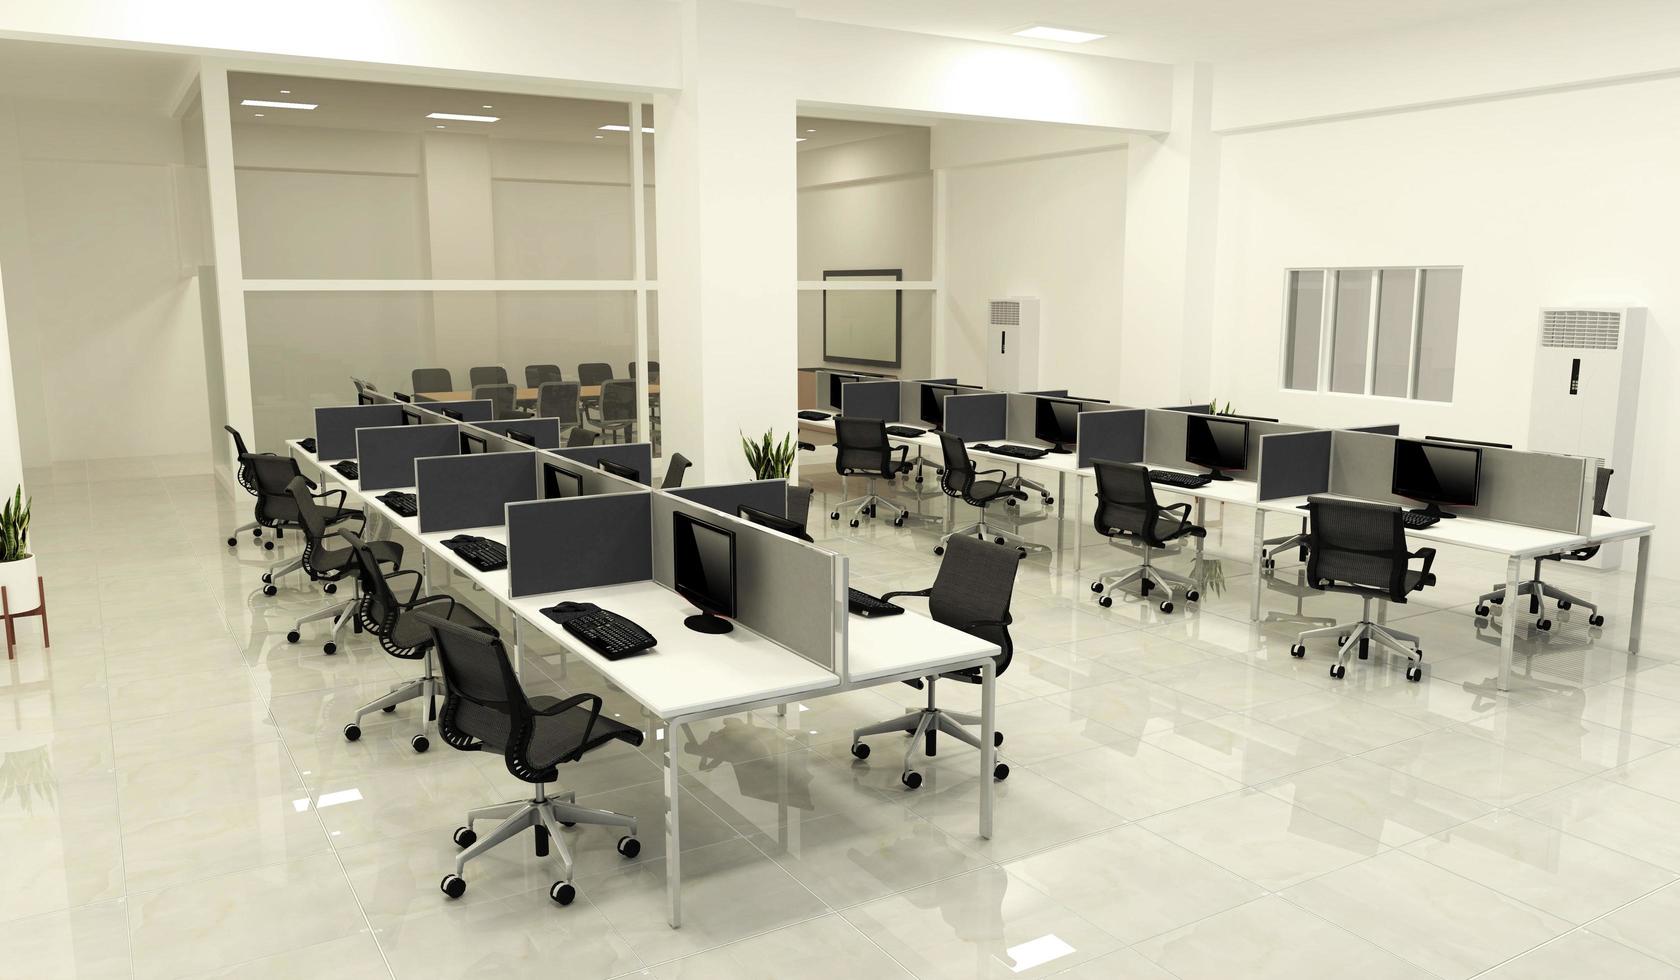 Office business - beautiful big room office room and conference table, modern style. 3D rendering photo